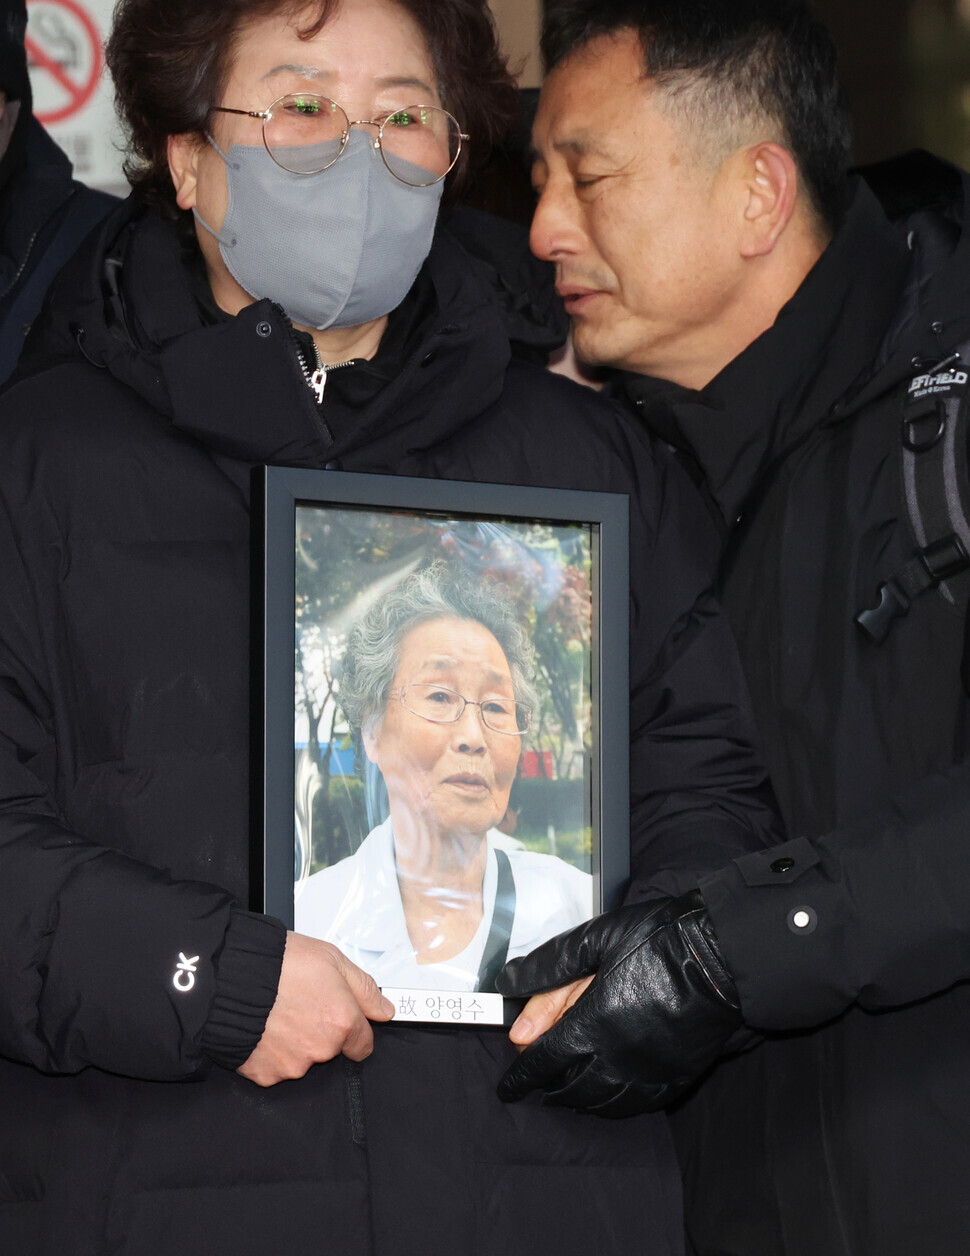 Family members of the late Yang Yeong-soo, who was conscripted to provide labor for Japan, and legal representatives of victims, hold a photo of Yang outside the Supreme Court in Seoul’s Seocho District following the conclusion of the trial. (Yonhap)